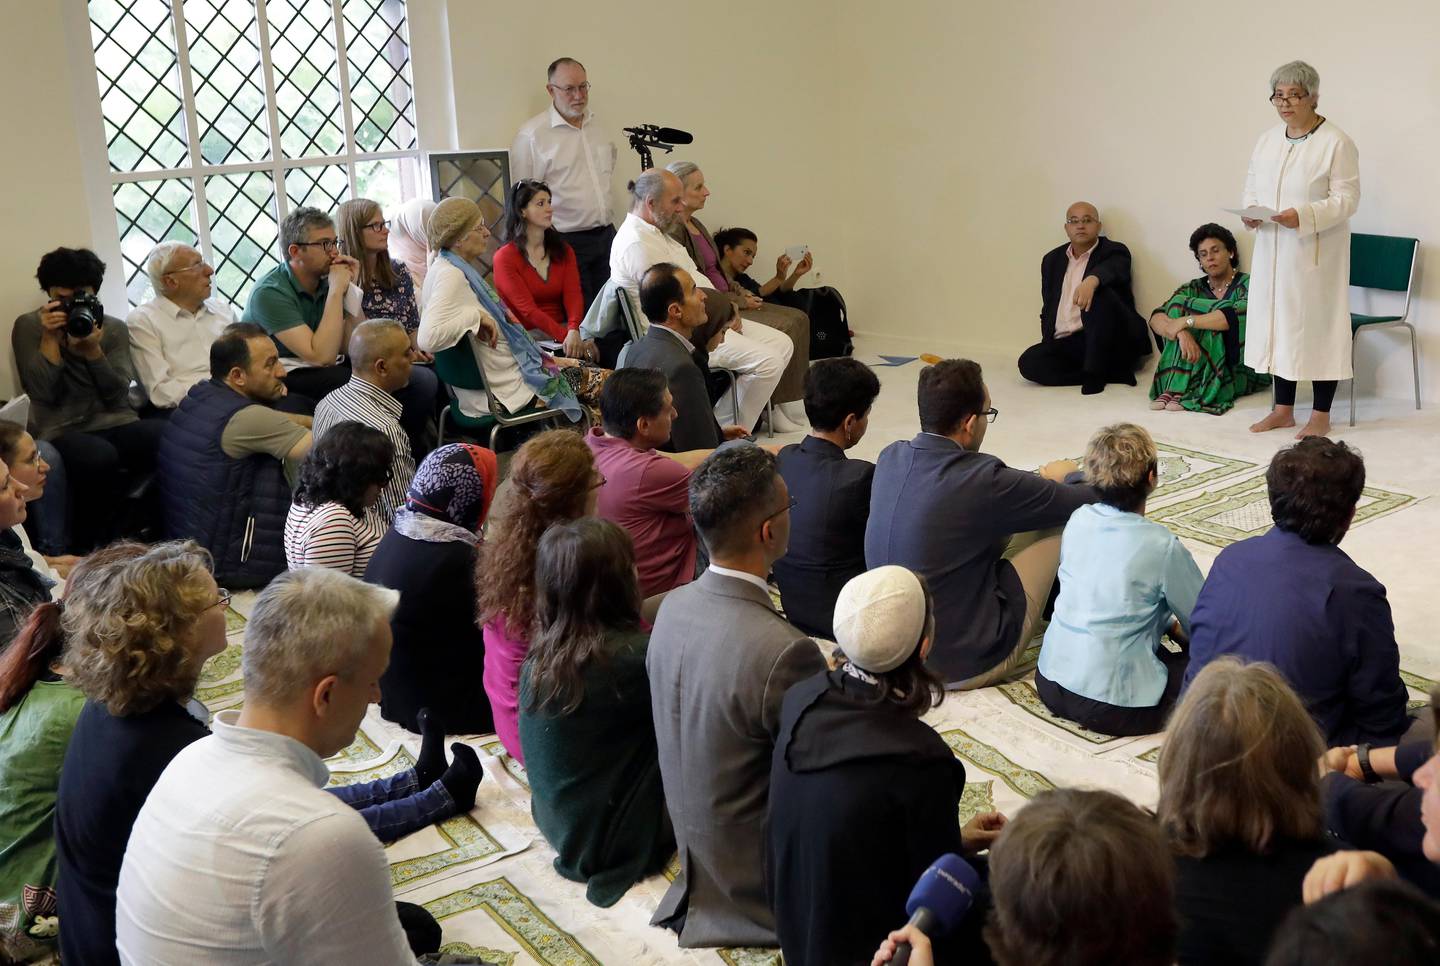 Seyran Ates, right, founder of the Ibn-Rushd-Goethe-Mosque preaches during the opening of the mosque in Berlin, Germany, Friday, June 16, 2017. Ates a daughter of Turkish immigrants has founded the first liberal mosque in Germany where men and women can pray together, homosexuals are welcome and Muslims of all sects can leave their inner-religious conflicts behind. (AP Photo/Michael Sohn)